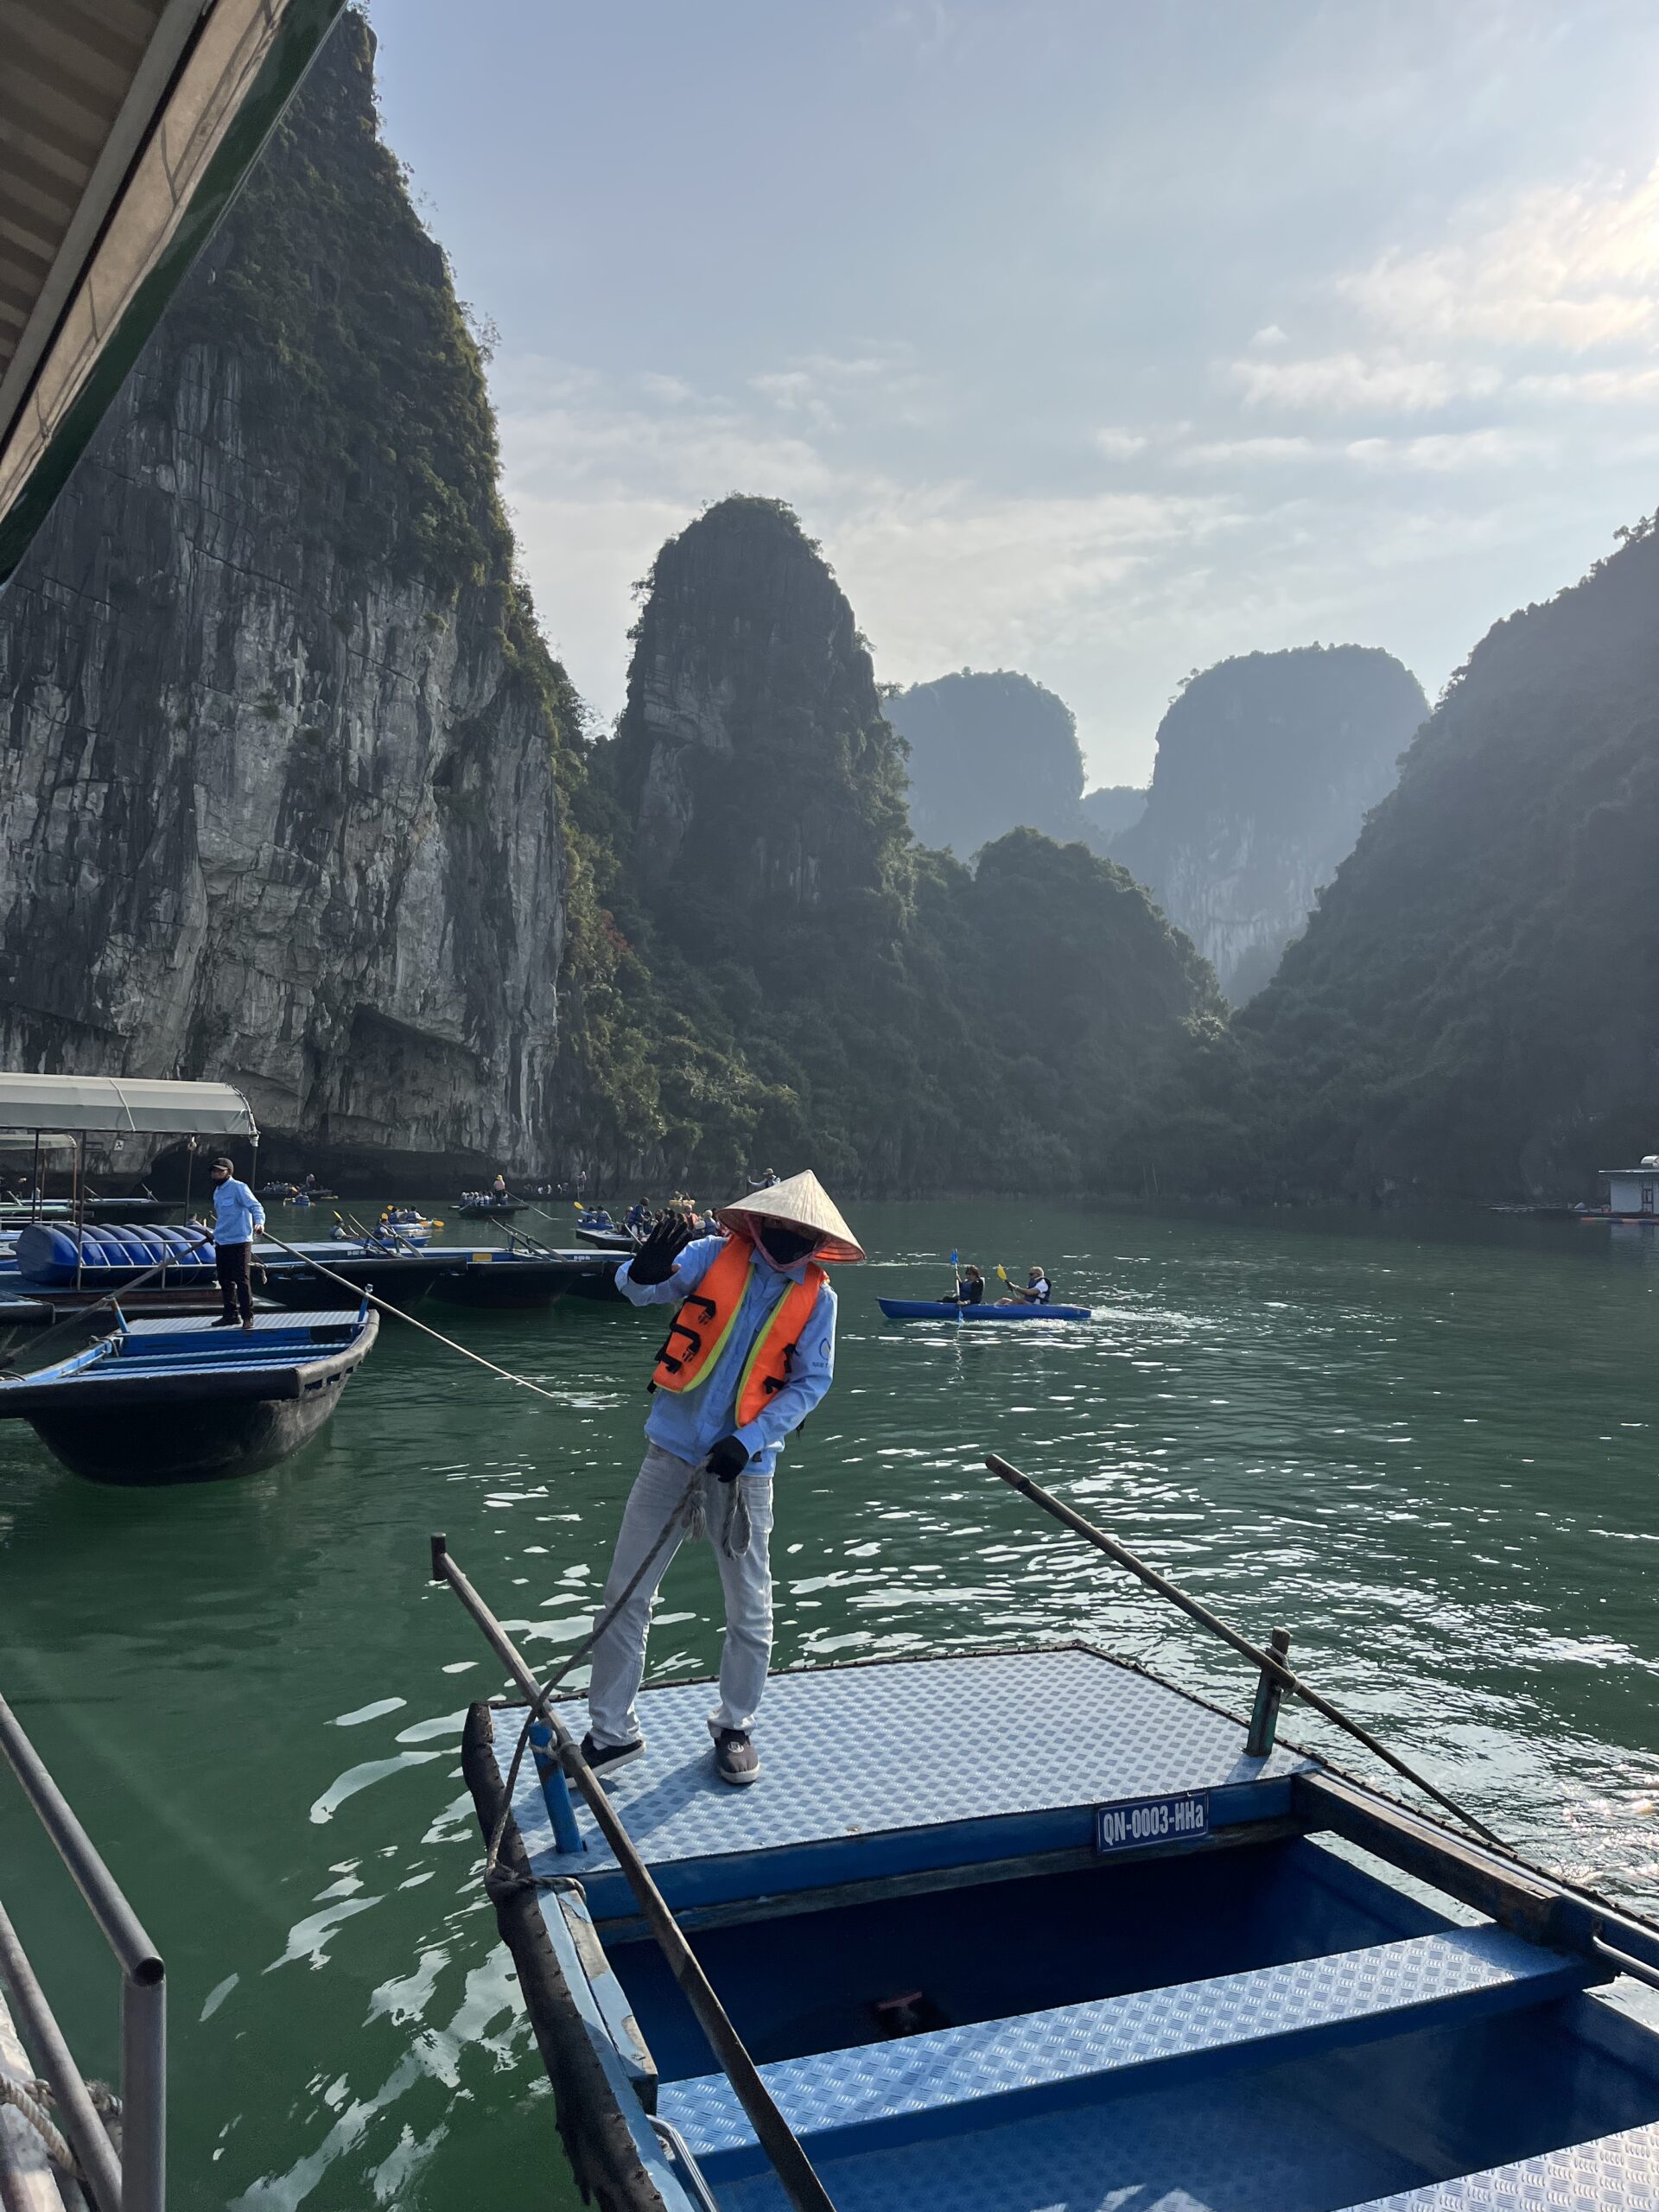 THE HALONG BAY CRUISE: NEGATIVE REVIEW – IT’S A TOURIST TRAP!